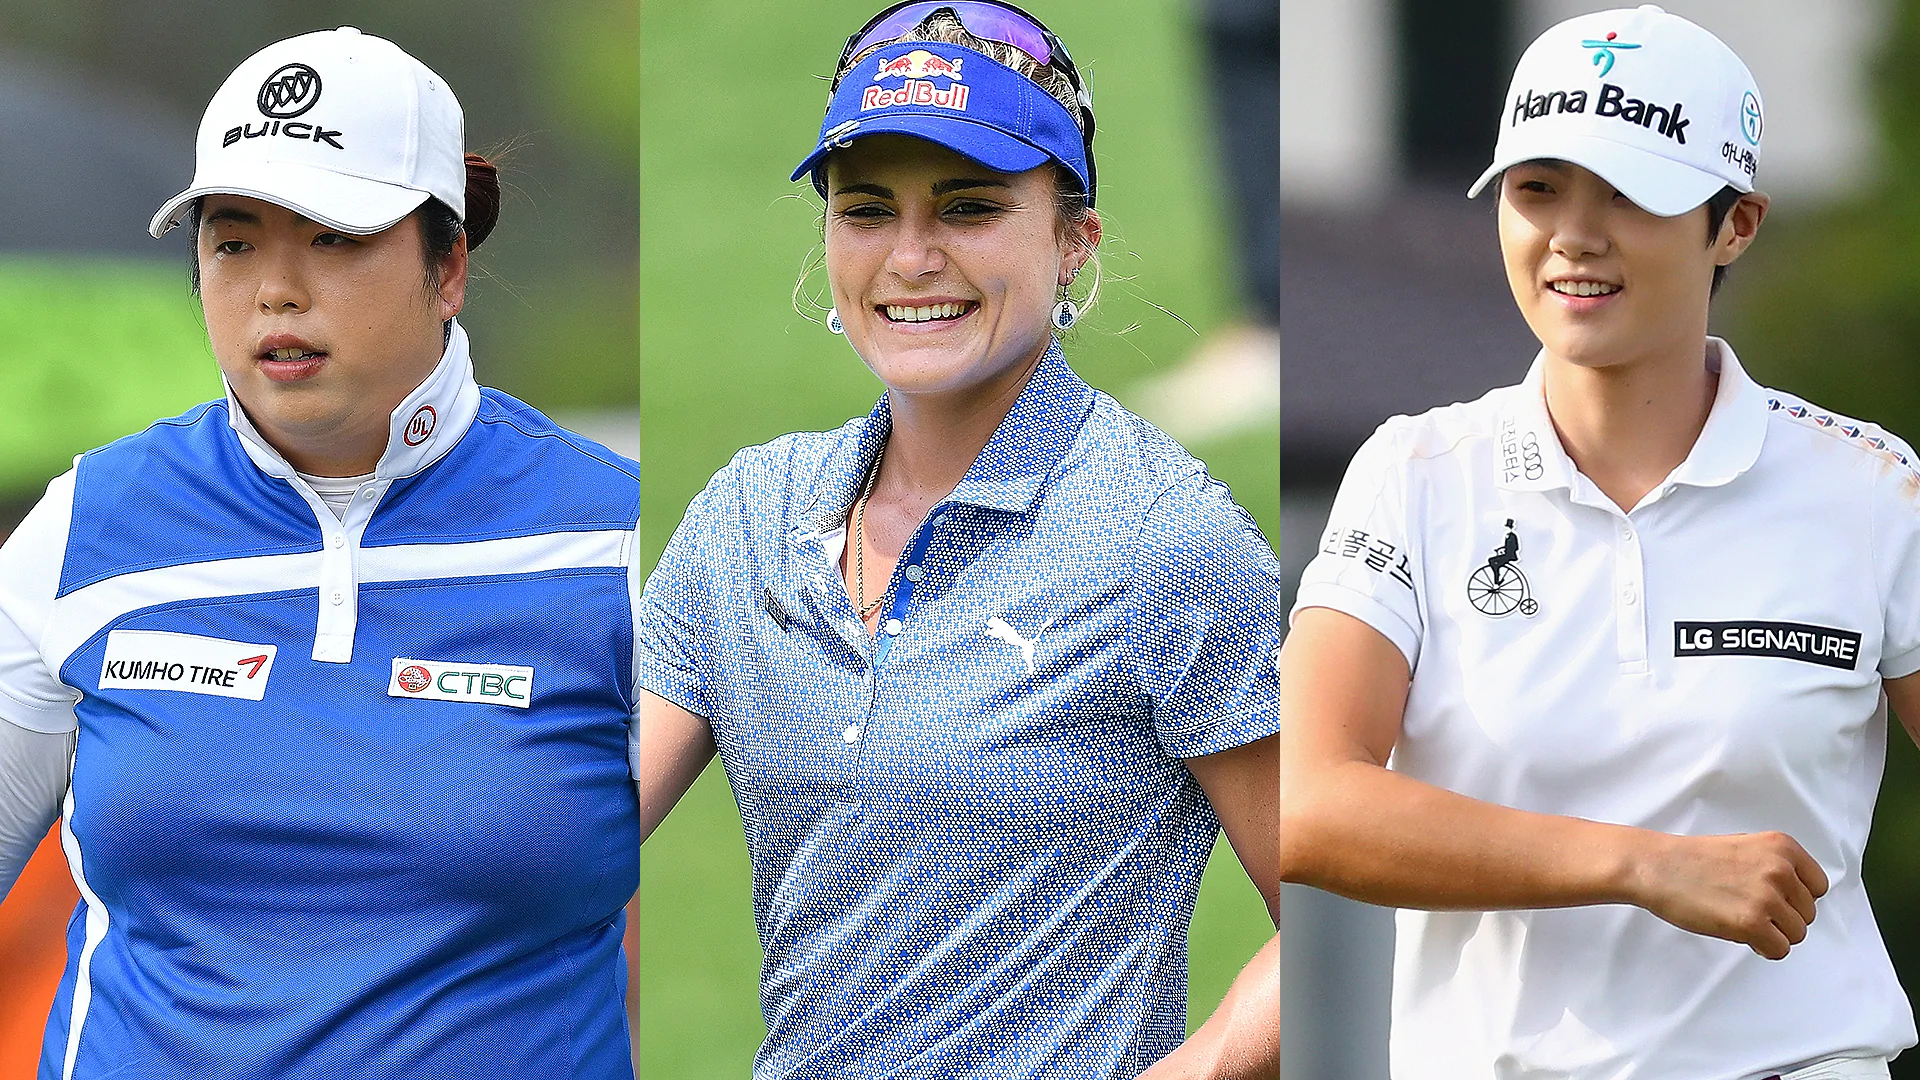 1-2-3 group: Feng, Lexi, Park together in Singapore